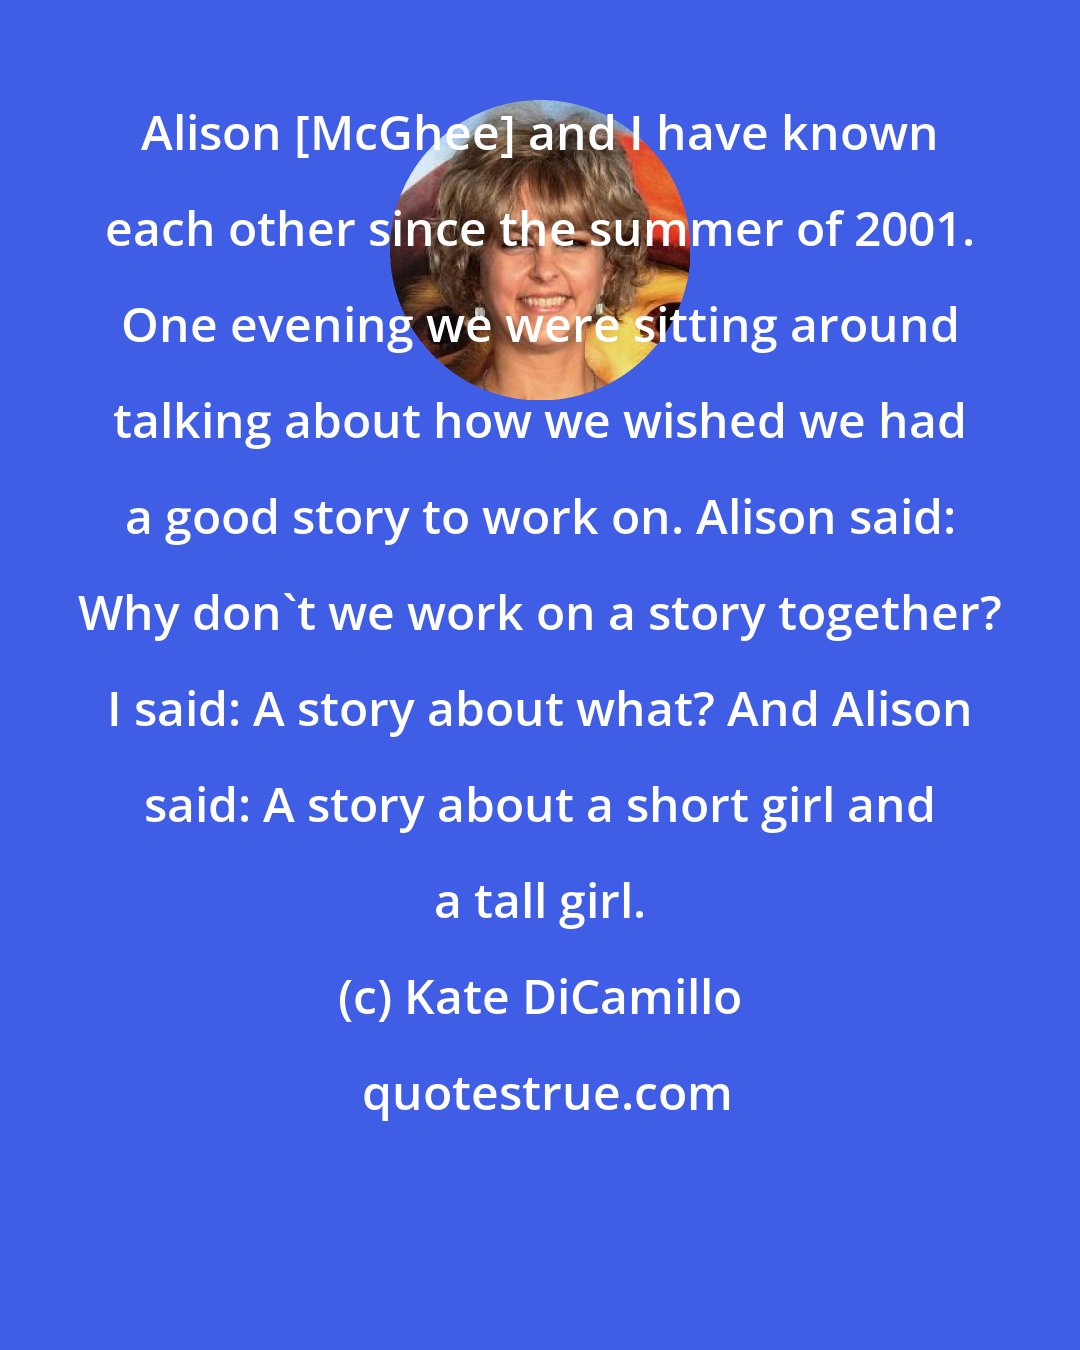 Kate DiCamillo: Alison [McGhee] and I have known each other since the summer of 2001. One evening we were sitting around talking about how we wished we had a good story to work on. Alison said: Why don't we work on a story together? I said: A story about what? And Alison said: A story about a short girl and a tall girl.